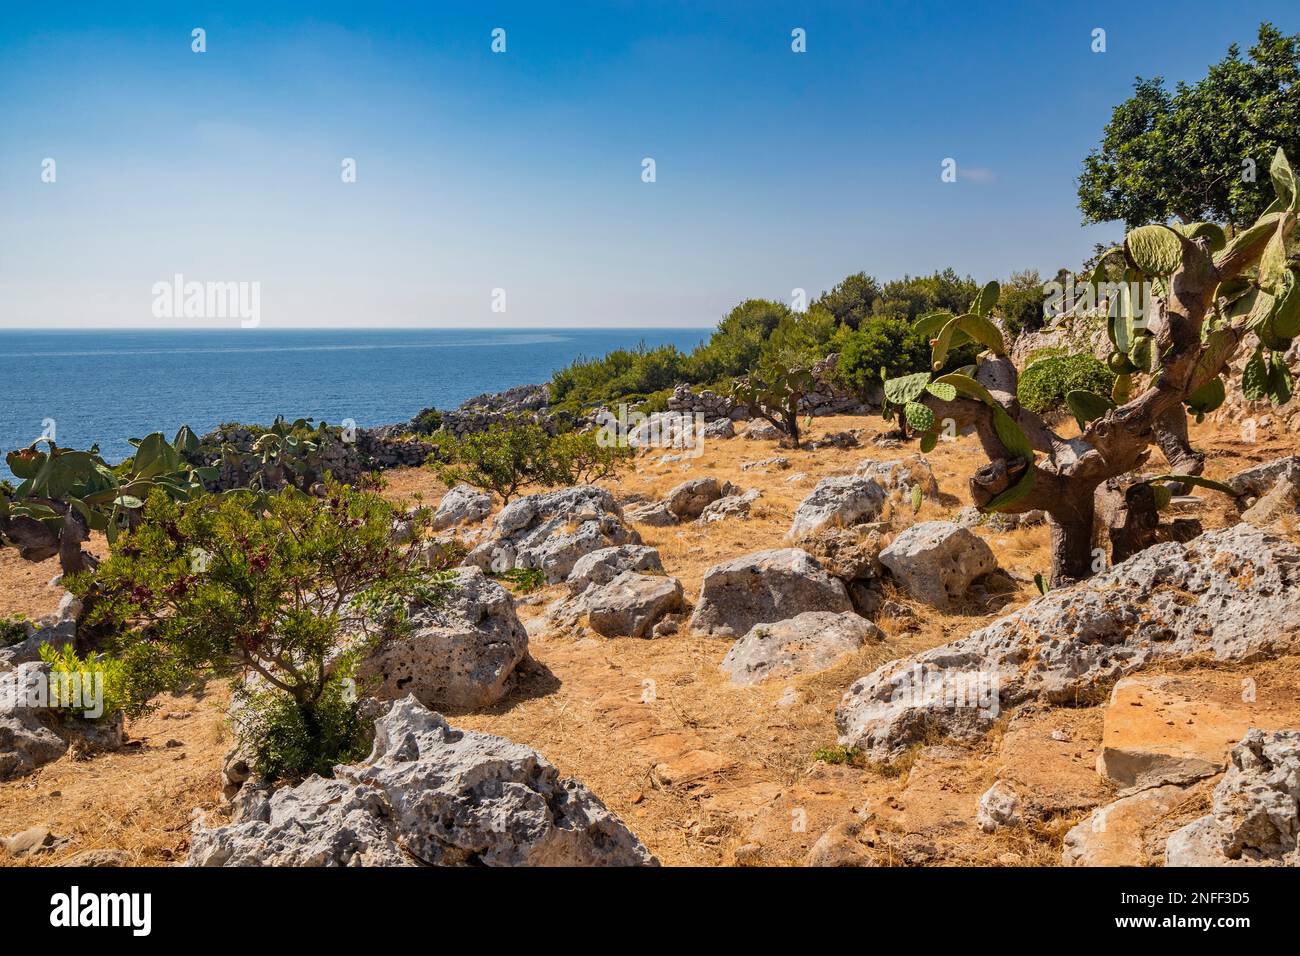 Gagliano del Capo. A garden of prickly pears and shrubs overlooks the beautiful panorama of the blue sea, on the rocky cliff of Salento. The path from Stock Photo